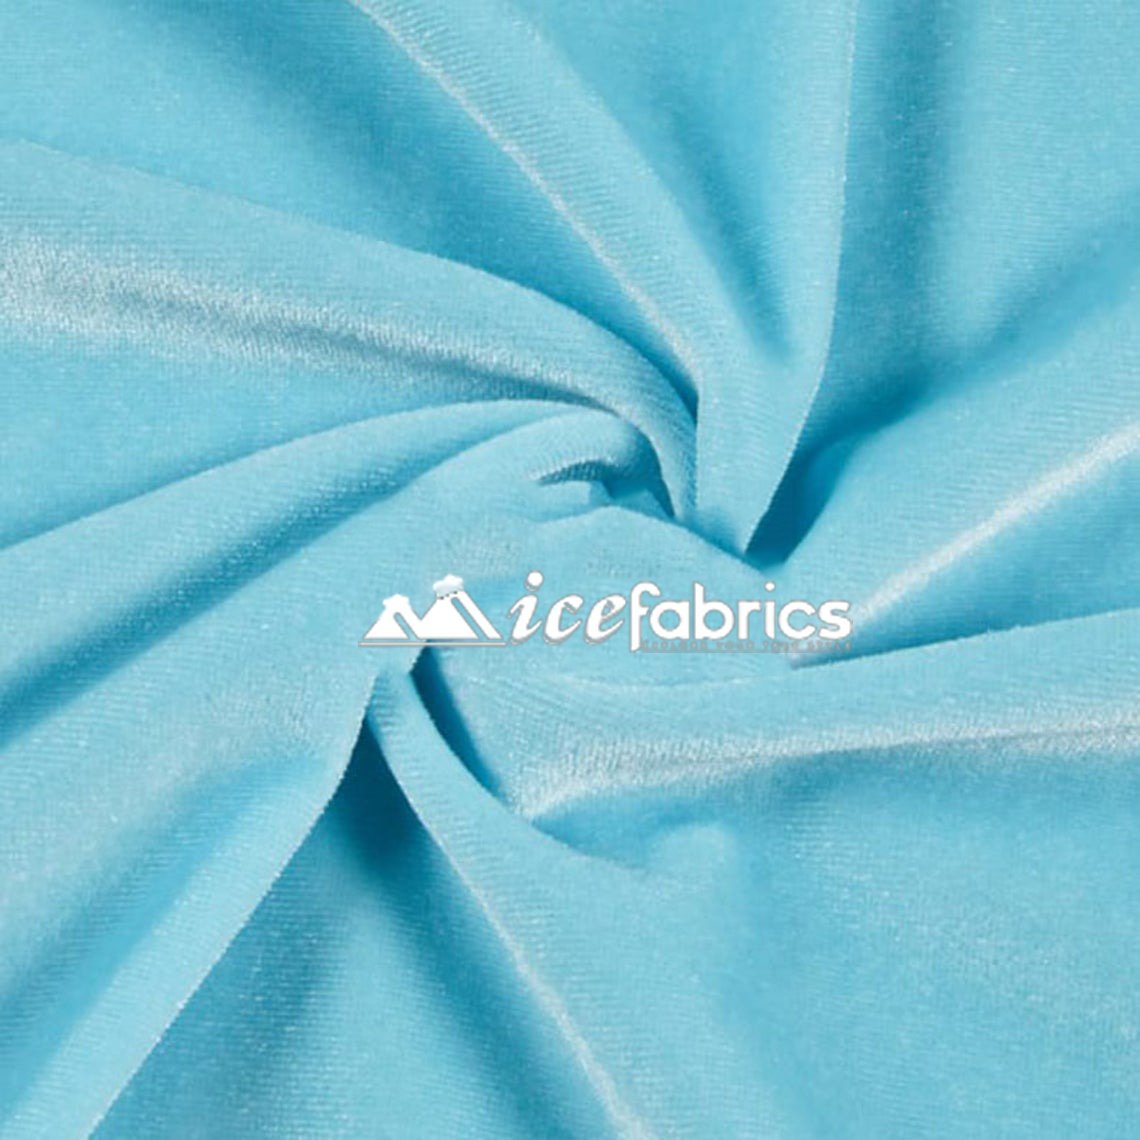 Hight Quality Stretch Velvet Fabric By The Roll (20 yards) Wholesale FabricVelvet FabricICE FABRICSICE FABRICSBaby BlueBy The Roll (60" Wide)Hight Quality Stretch Velvet Fabric By The Roll (20 yards) Wholesale Fabric ICE FABRICS Baby Blue